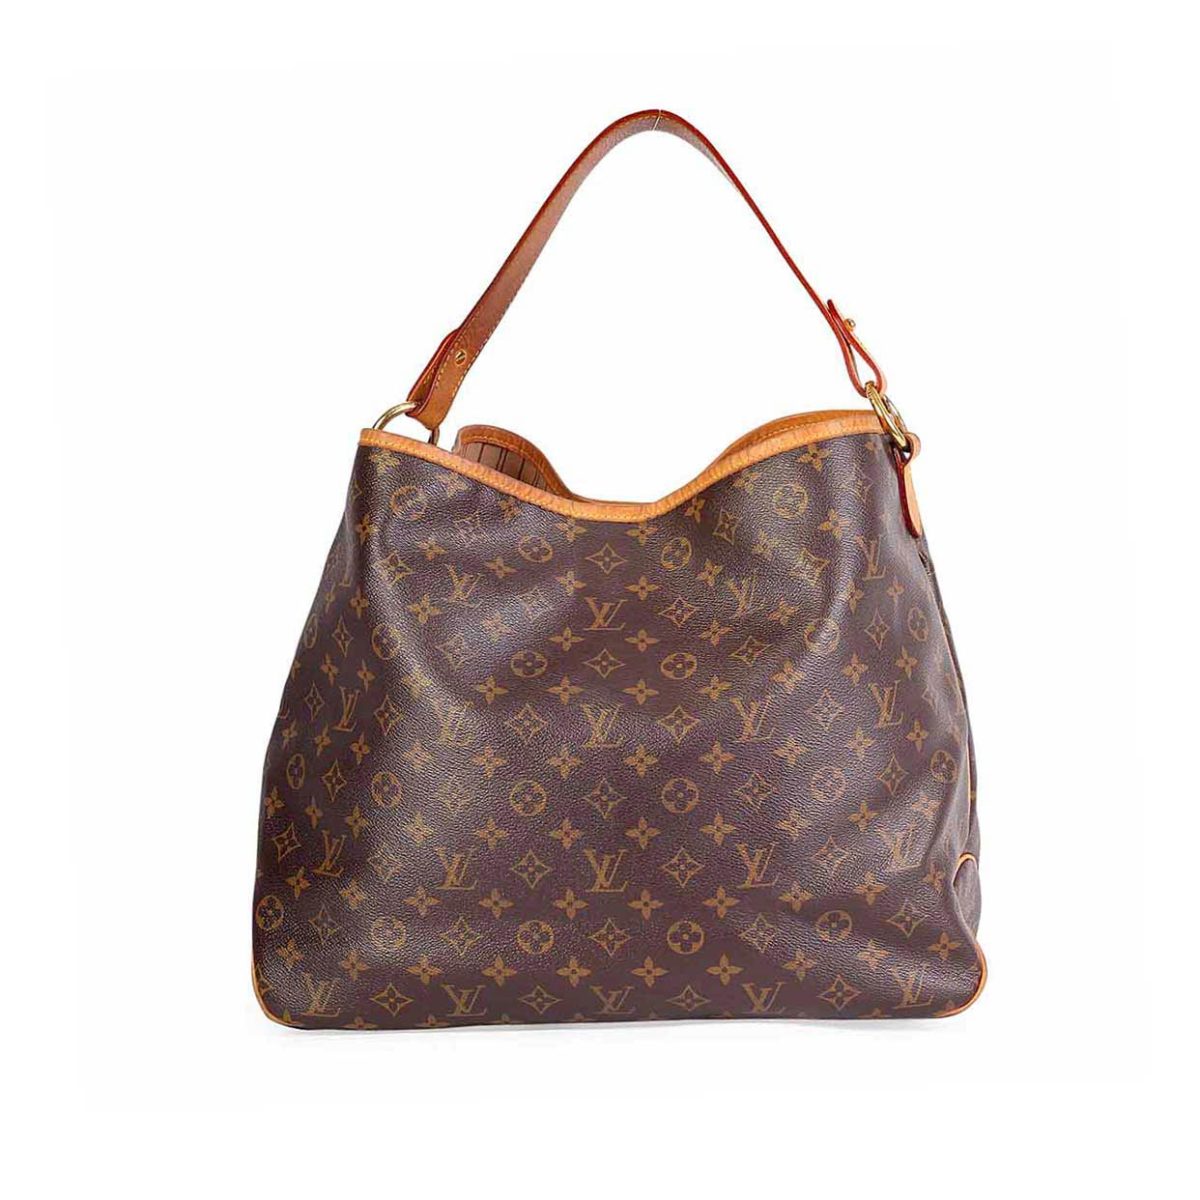 Louis Vuitton Delightful Mm Measurements | Confederated Tribes of the Umatilla Indian Reservation